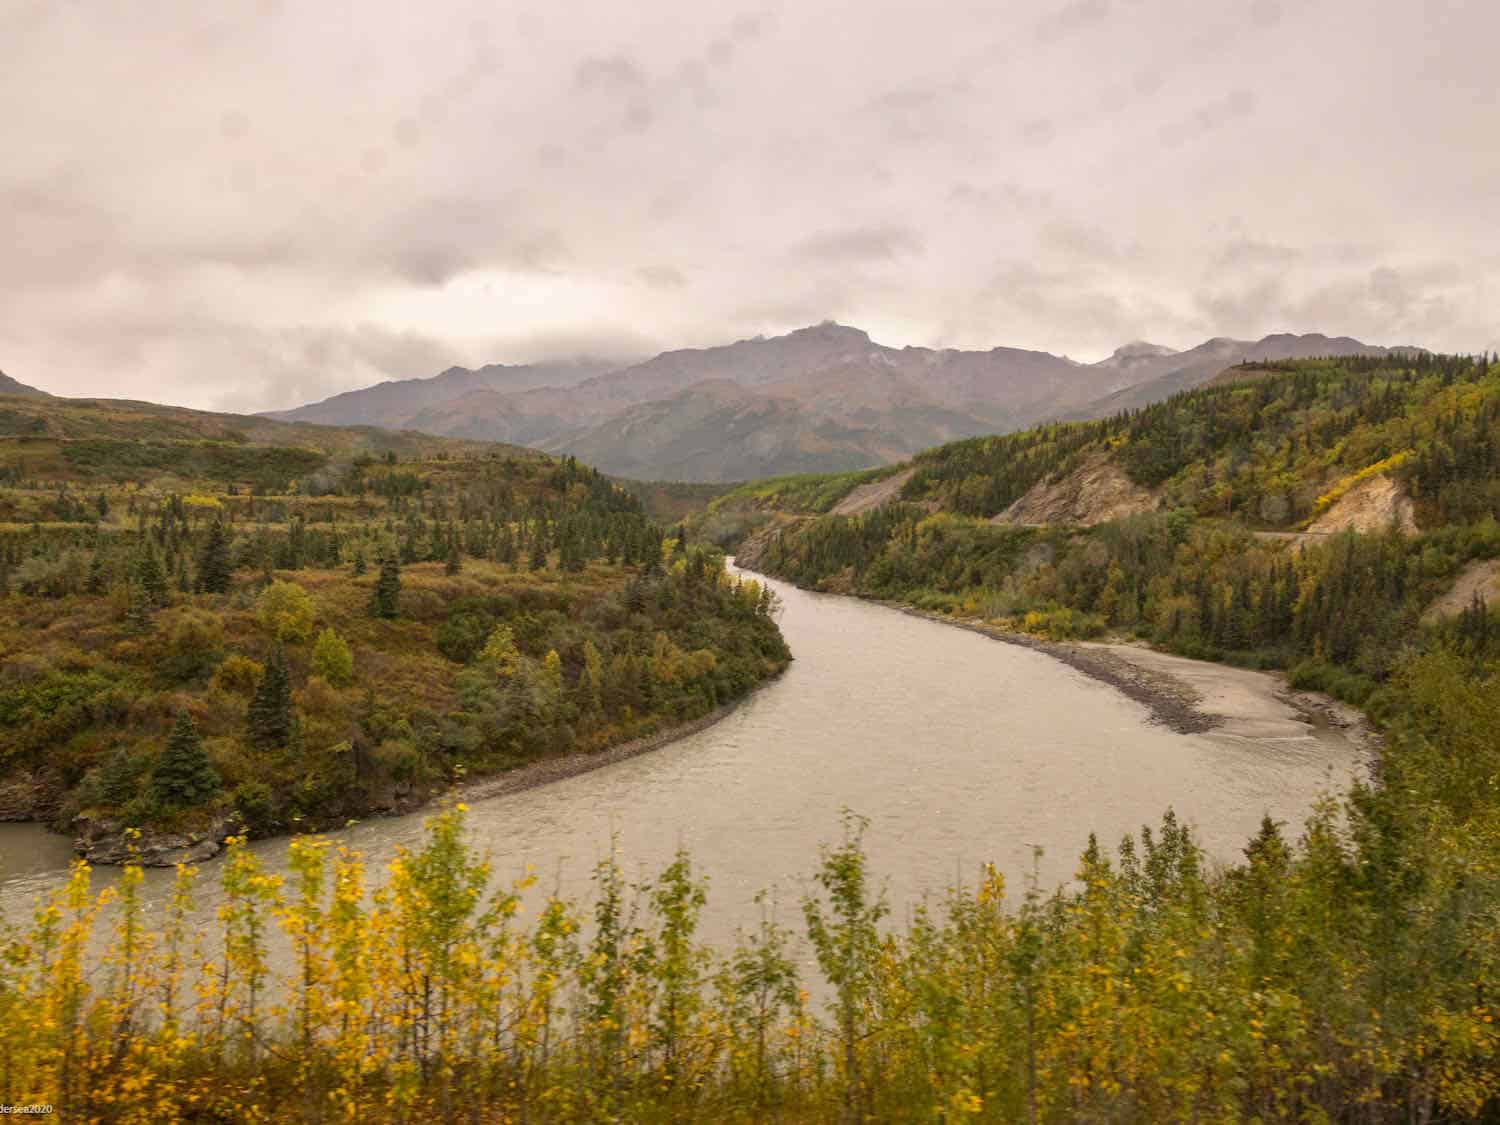 river with low hills of green and gold on both sides. Taller mountains in the distance on the train ride from Fairbanks to Denali.